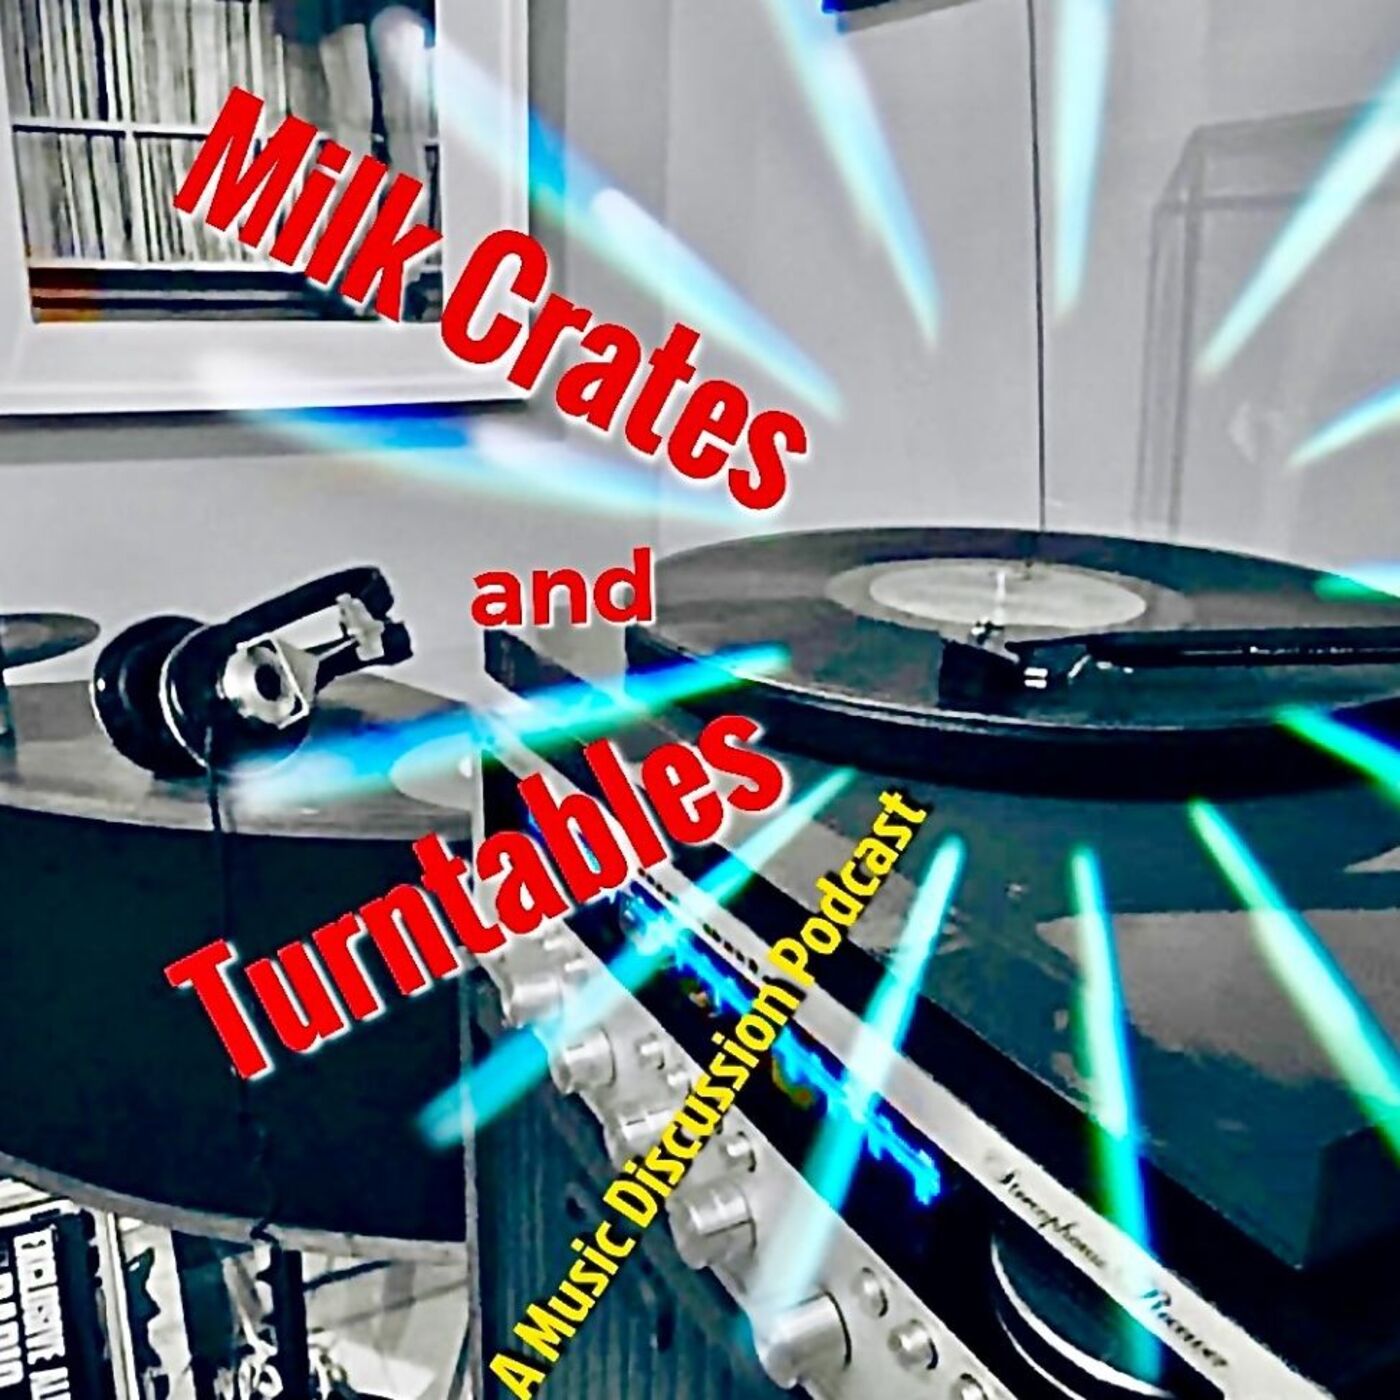 Fresh update on "milk" discussed on Milk Crates and Turntables. A Music Discussion Podcast